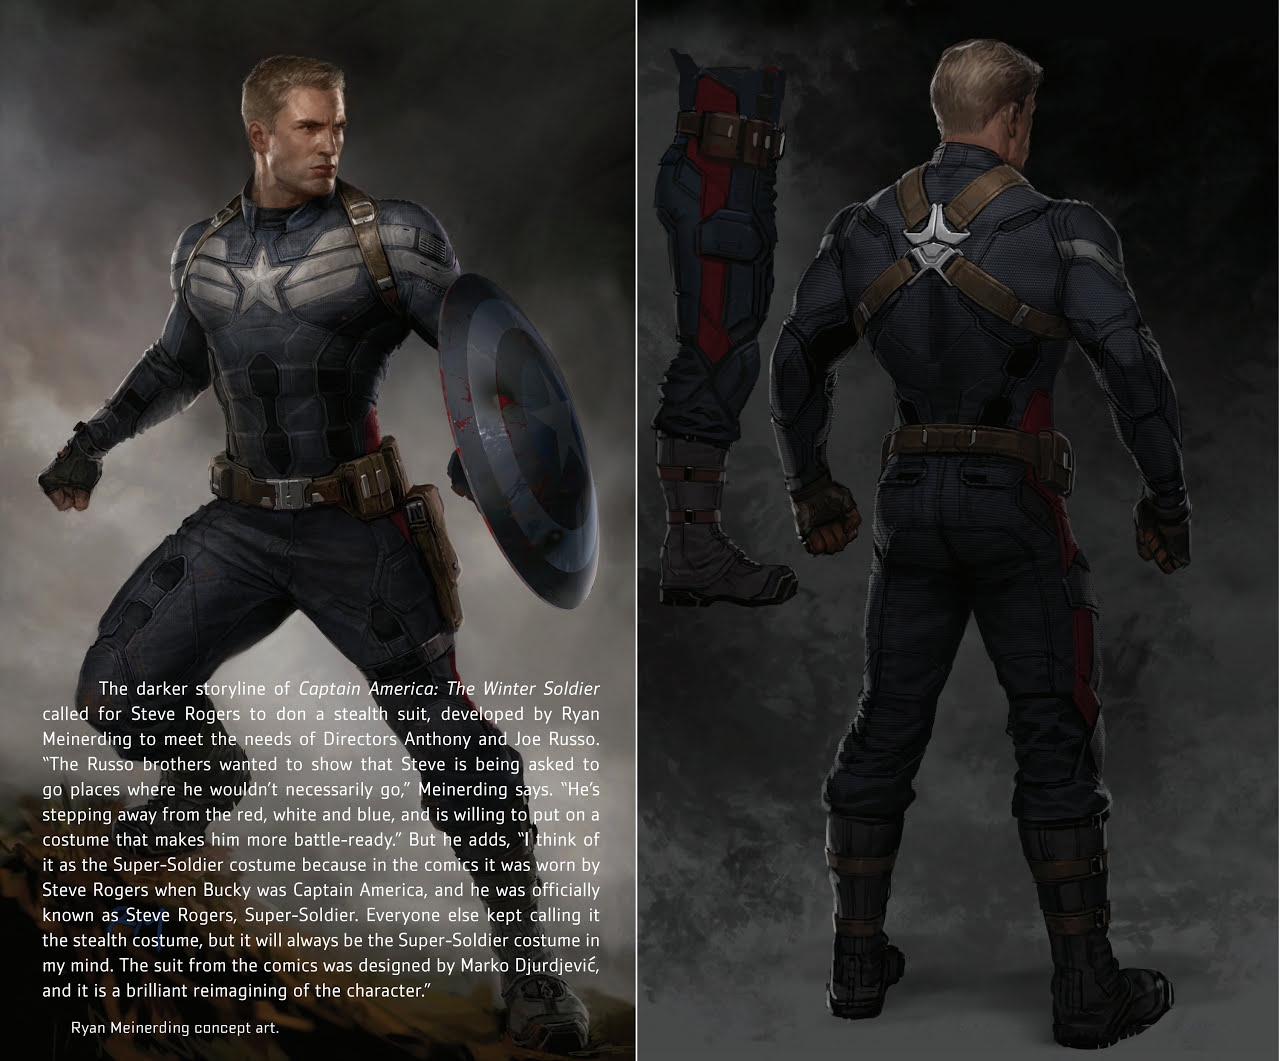 The Road to Marvel's Avengers Age of Ultron - The Art of the Marvel Cinematic Universe 112